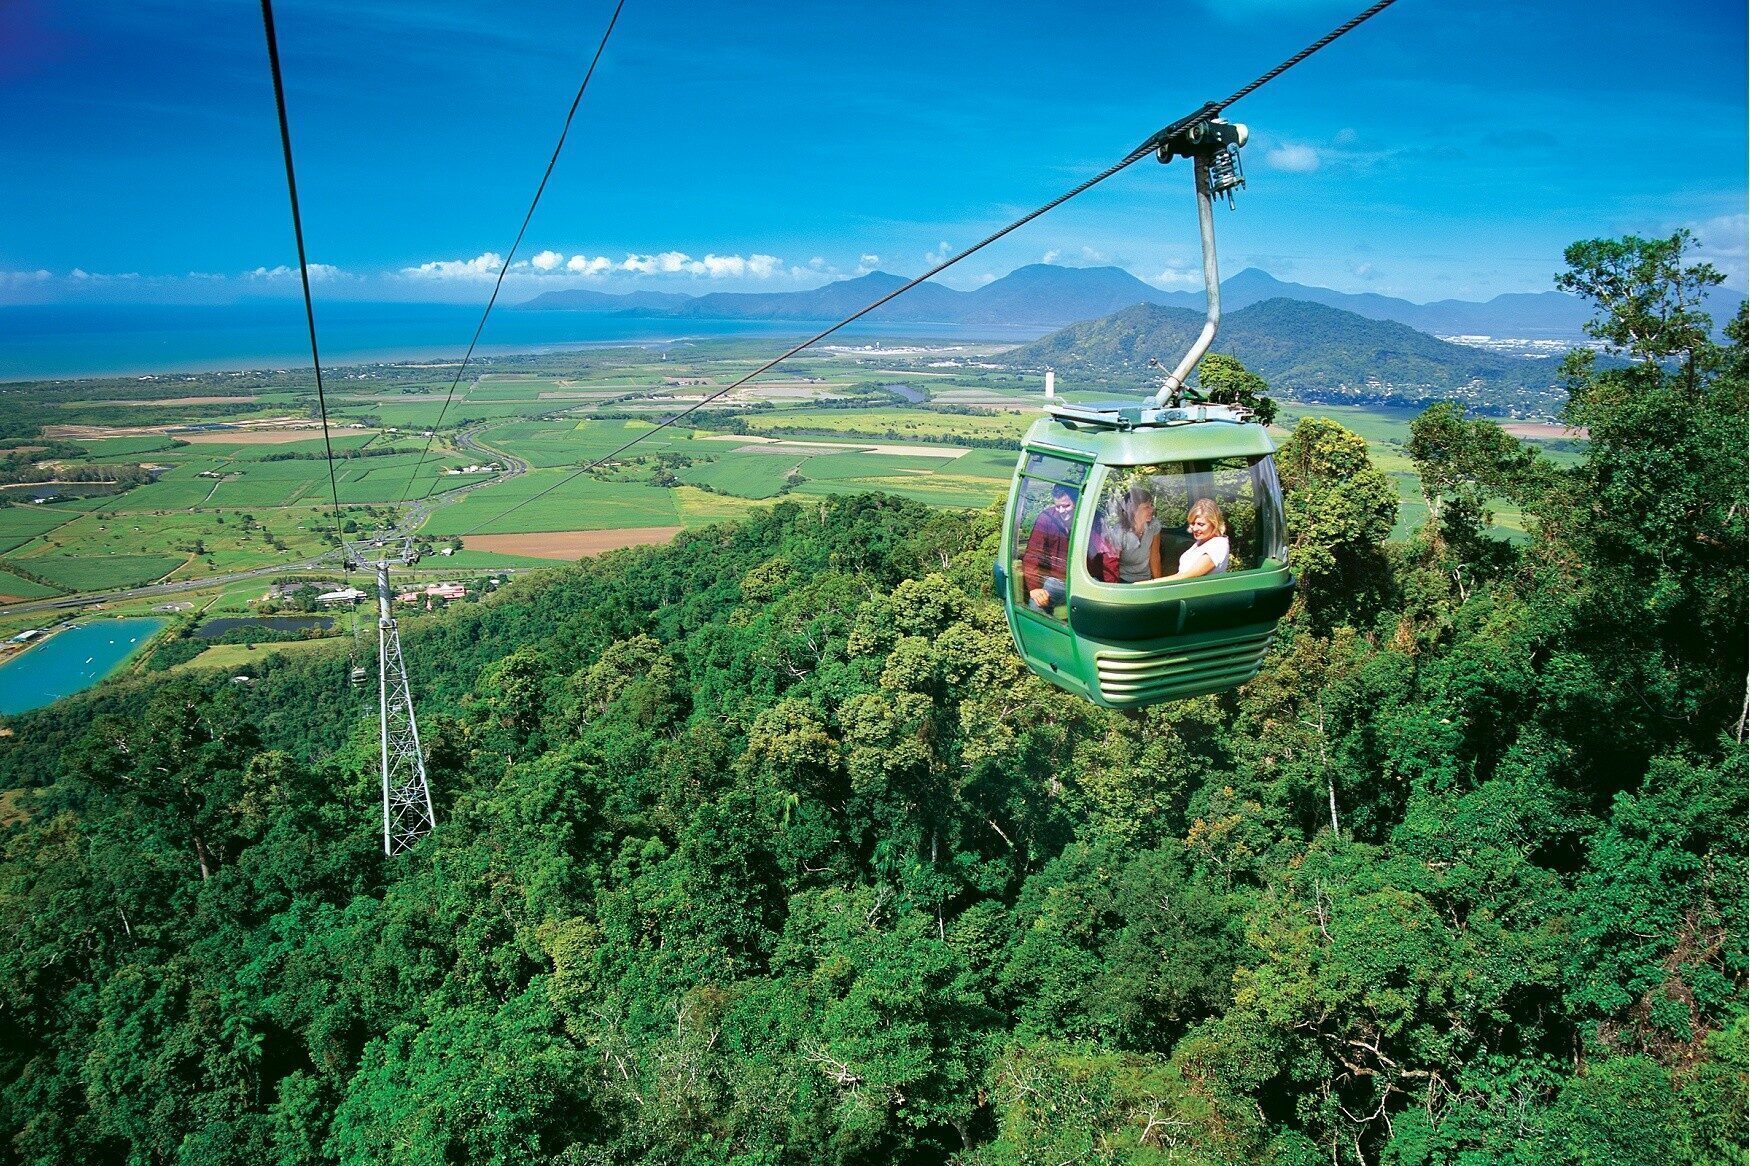 The Cairns Skyrail